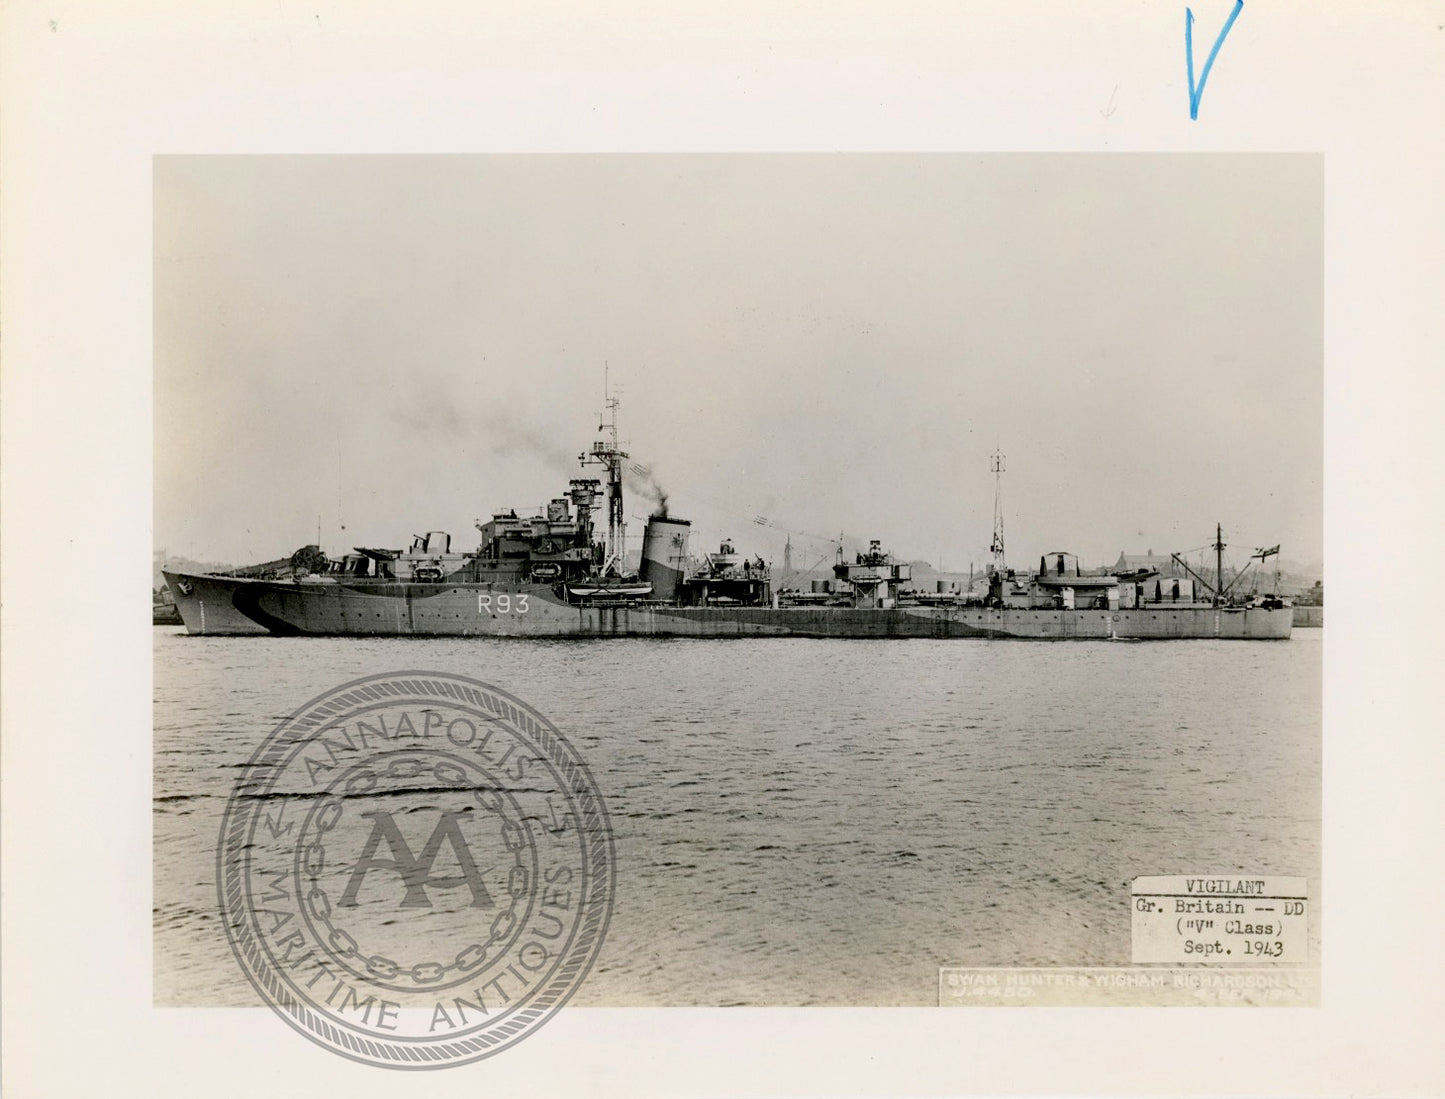 British and Canadian "V" Class Destroyers